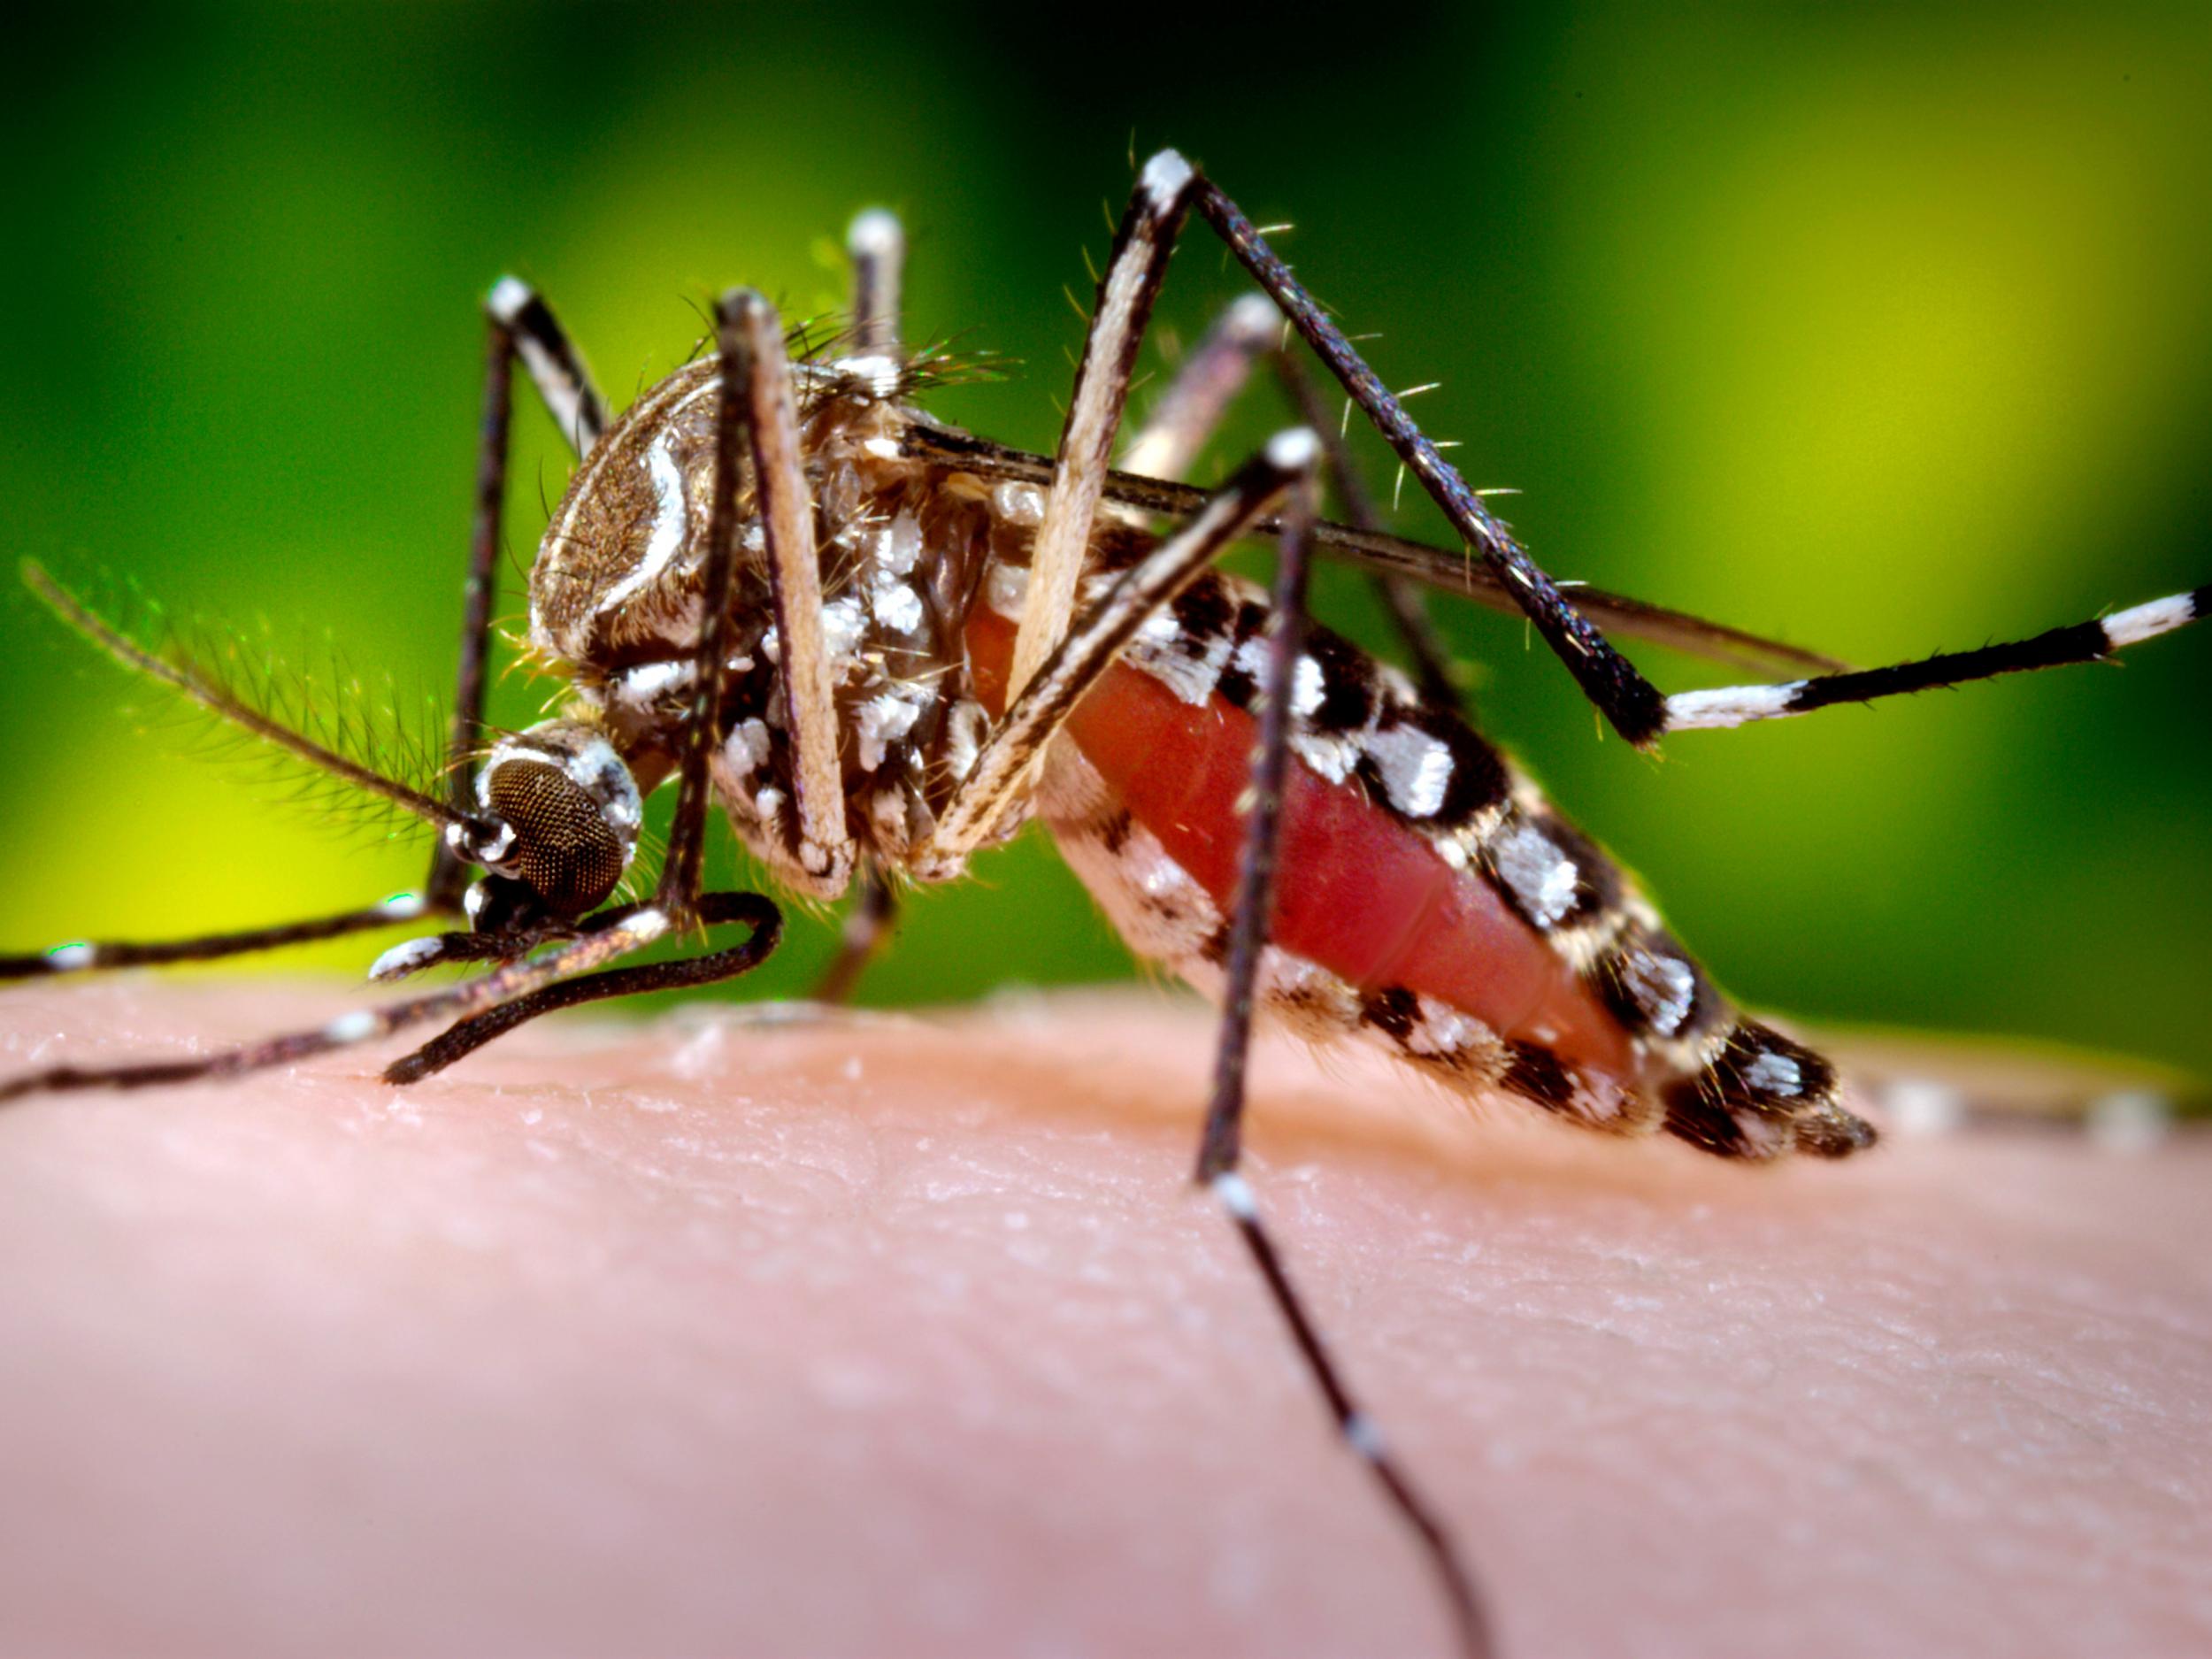 Mosquitoes spread a variety of deadly diseases to humans, including malaria and Dengue fever